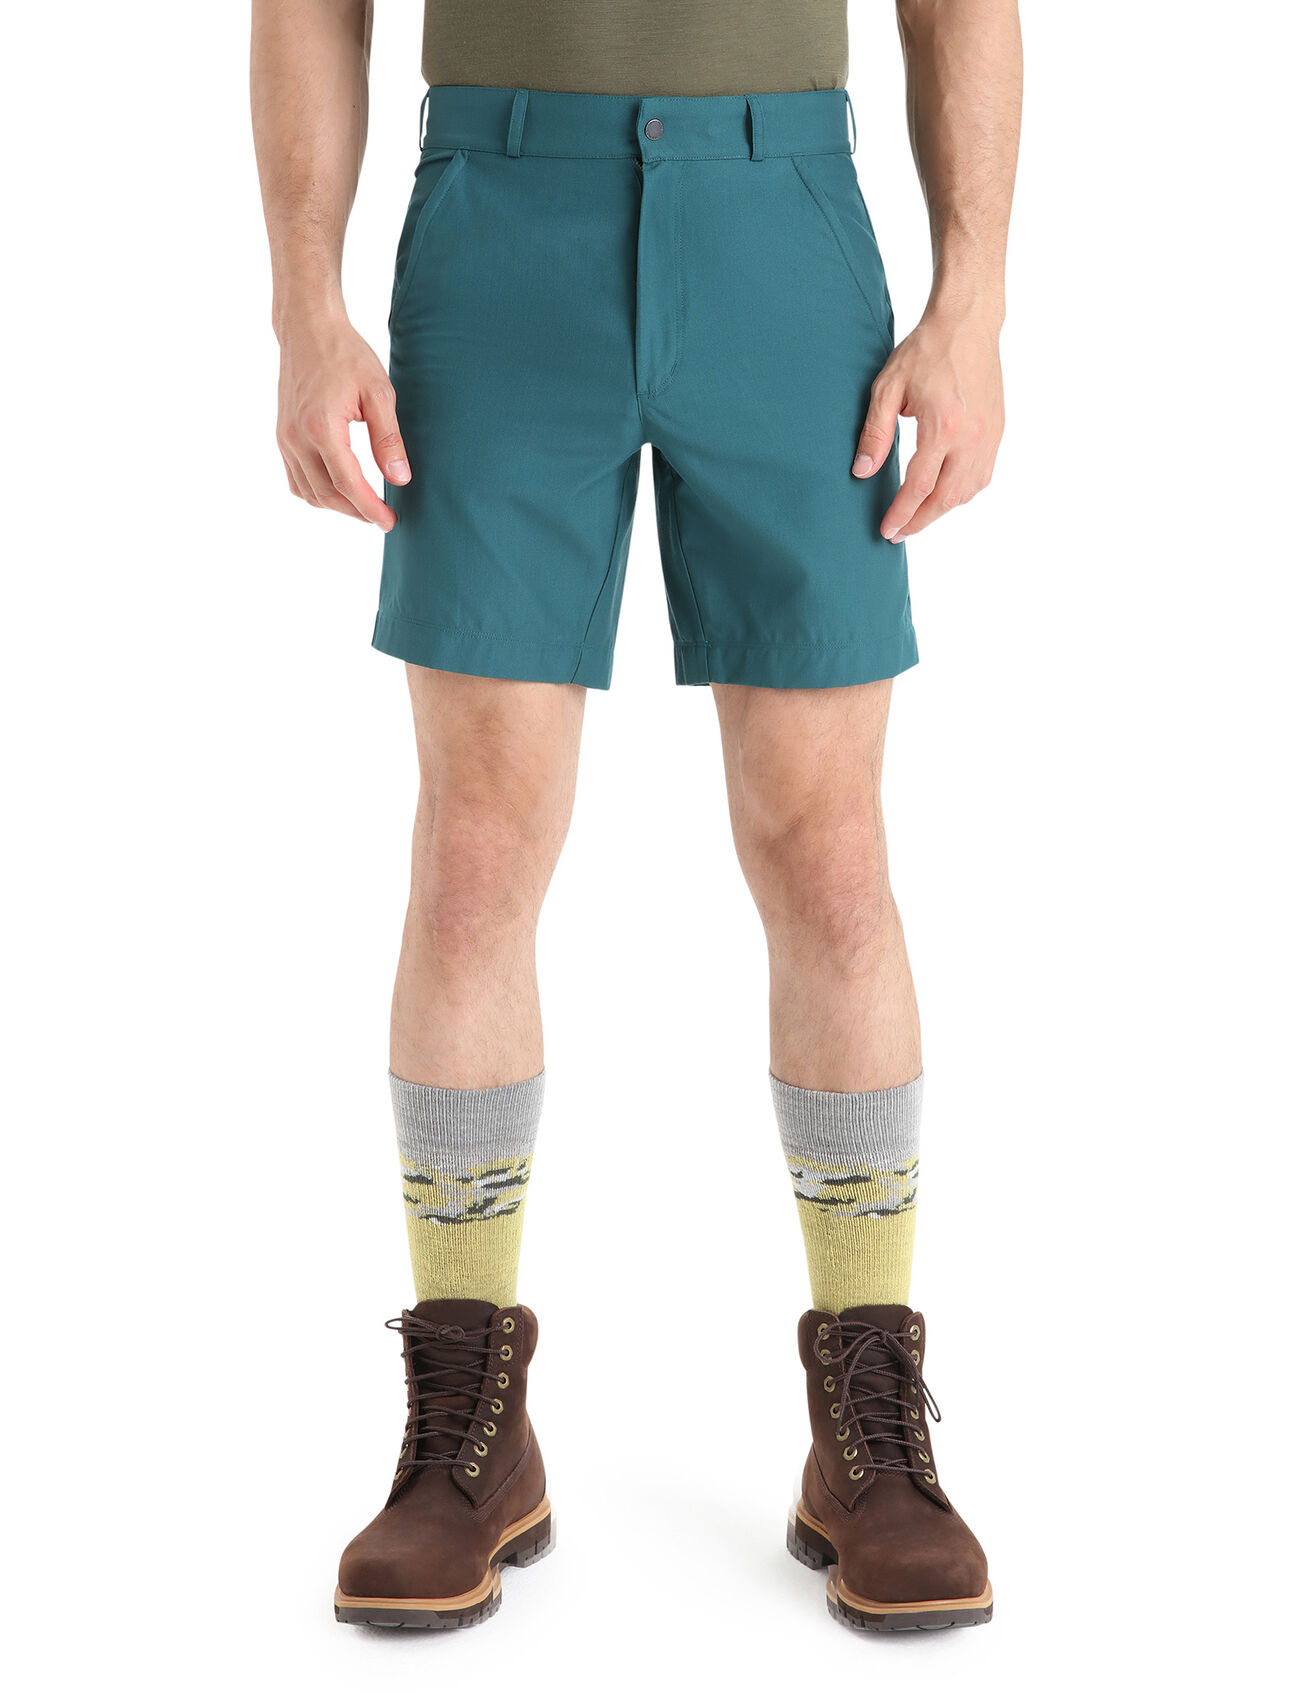 Mens Merino Hike Shorts A durable and dependable mountain short made from a unique blend of merino wool and organic cotton, the Hike Shorts are perfect for mountain adventures of all kinds.